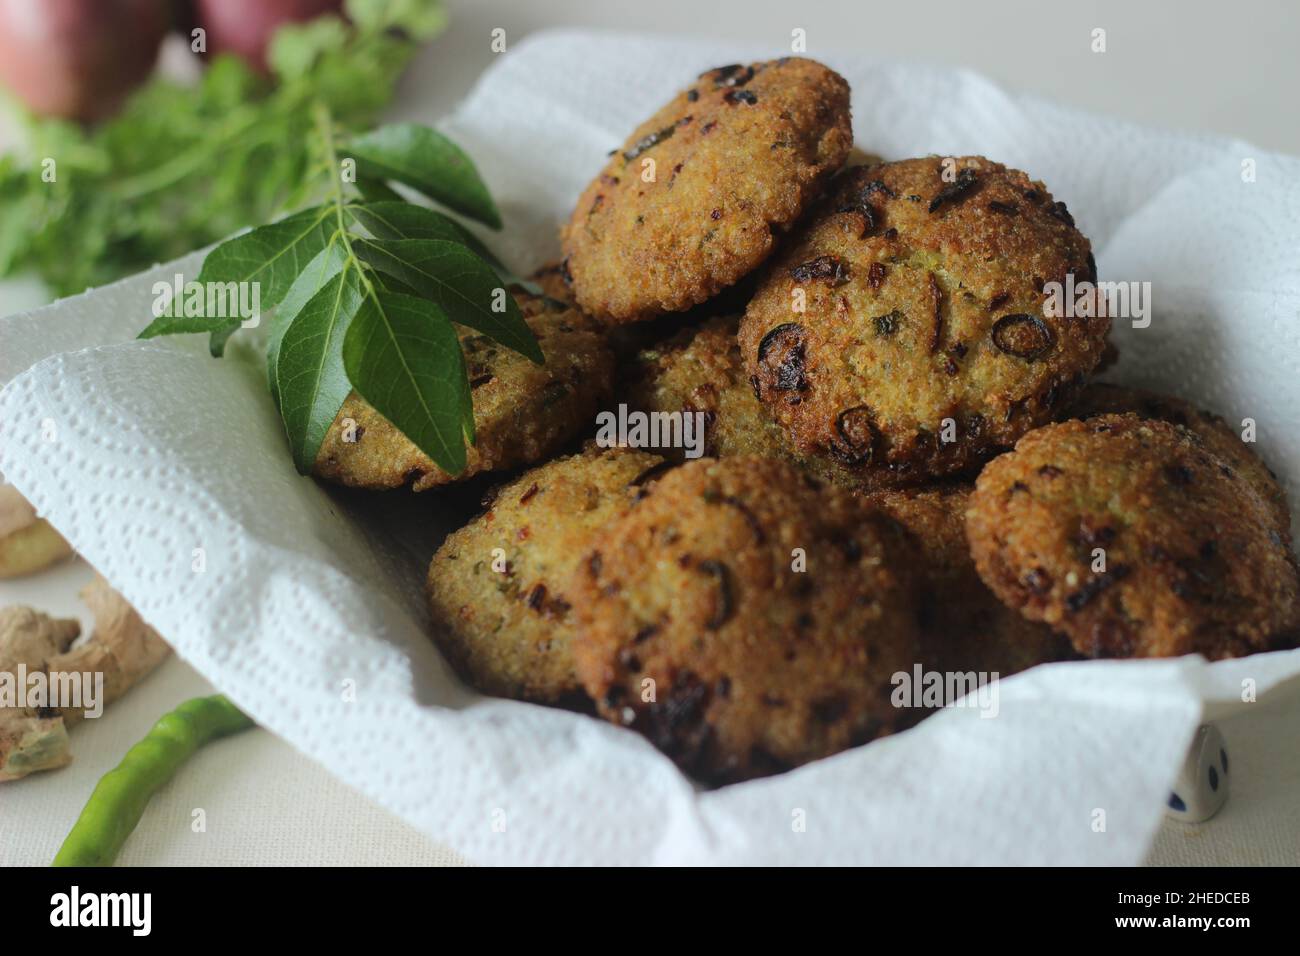 Kodo millet fritters. A crispy fritters made with cooked and mashed kodo millet flour and spices. Disk shaped deep fried evening snack. Commonly known Stock Photo